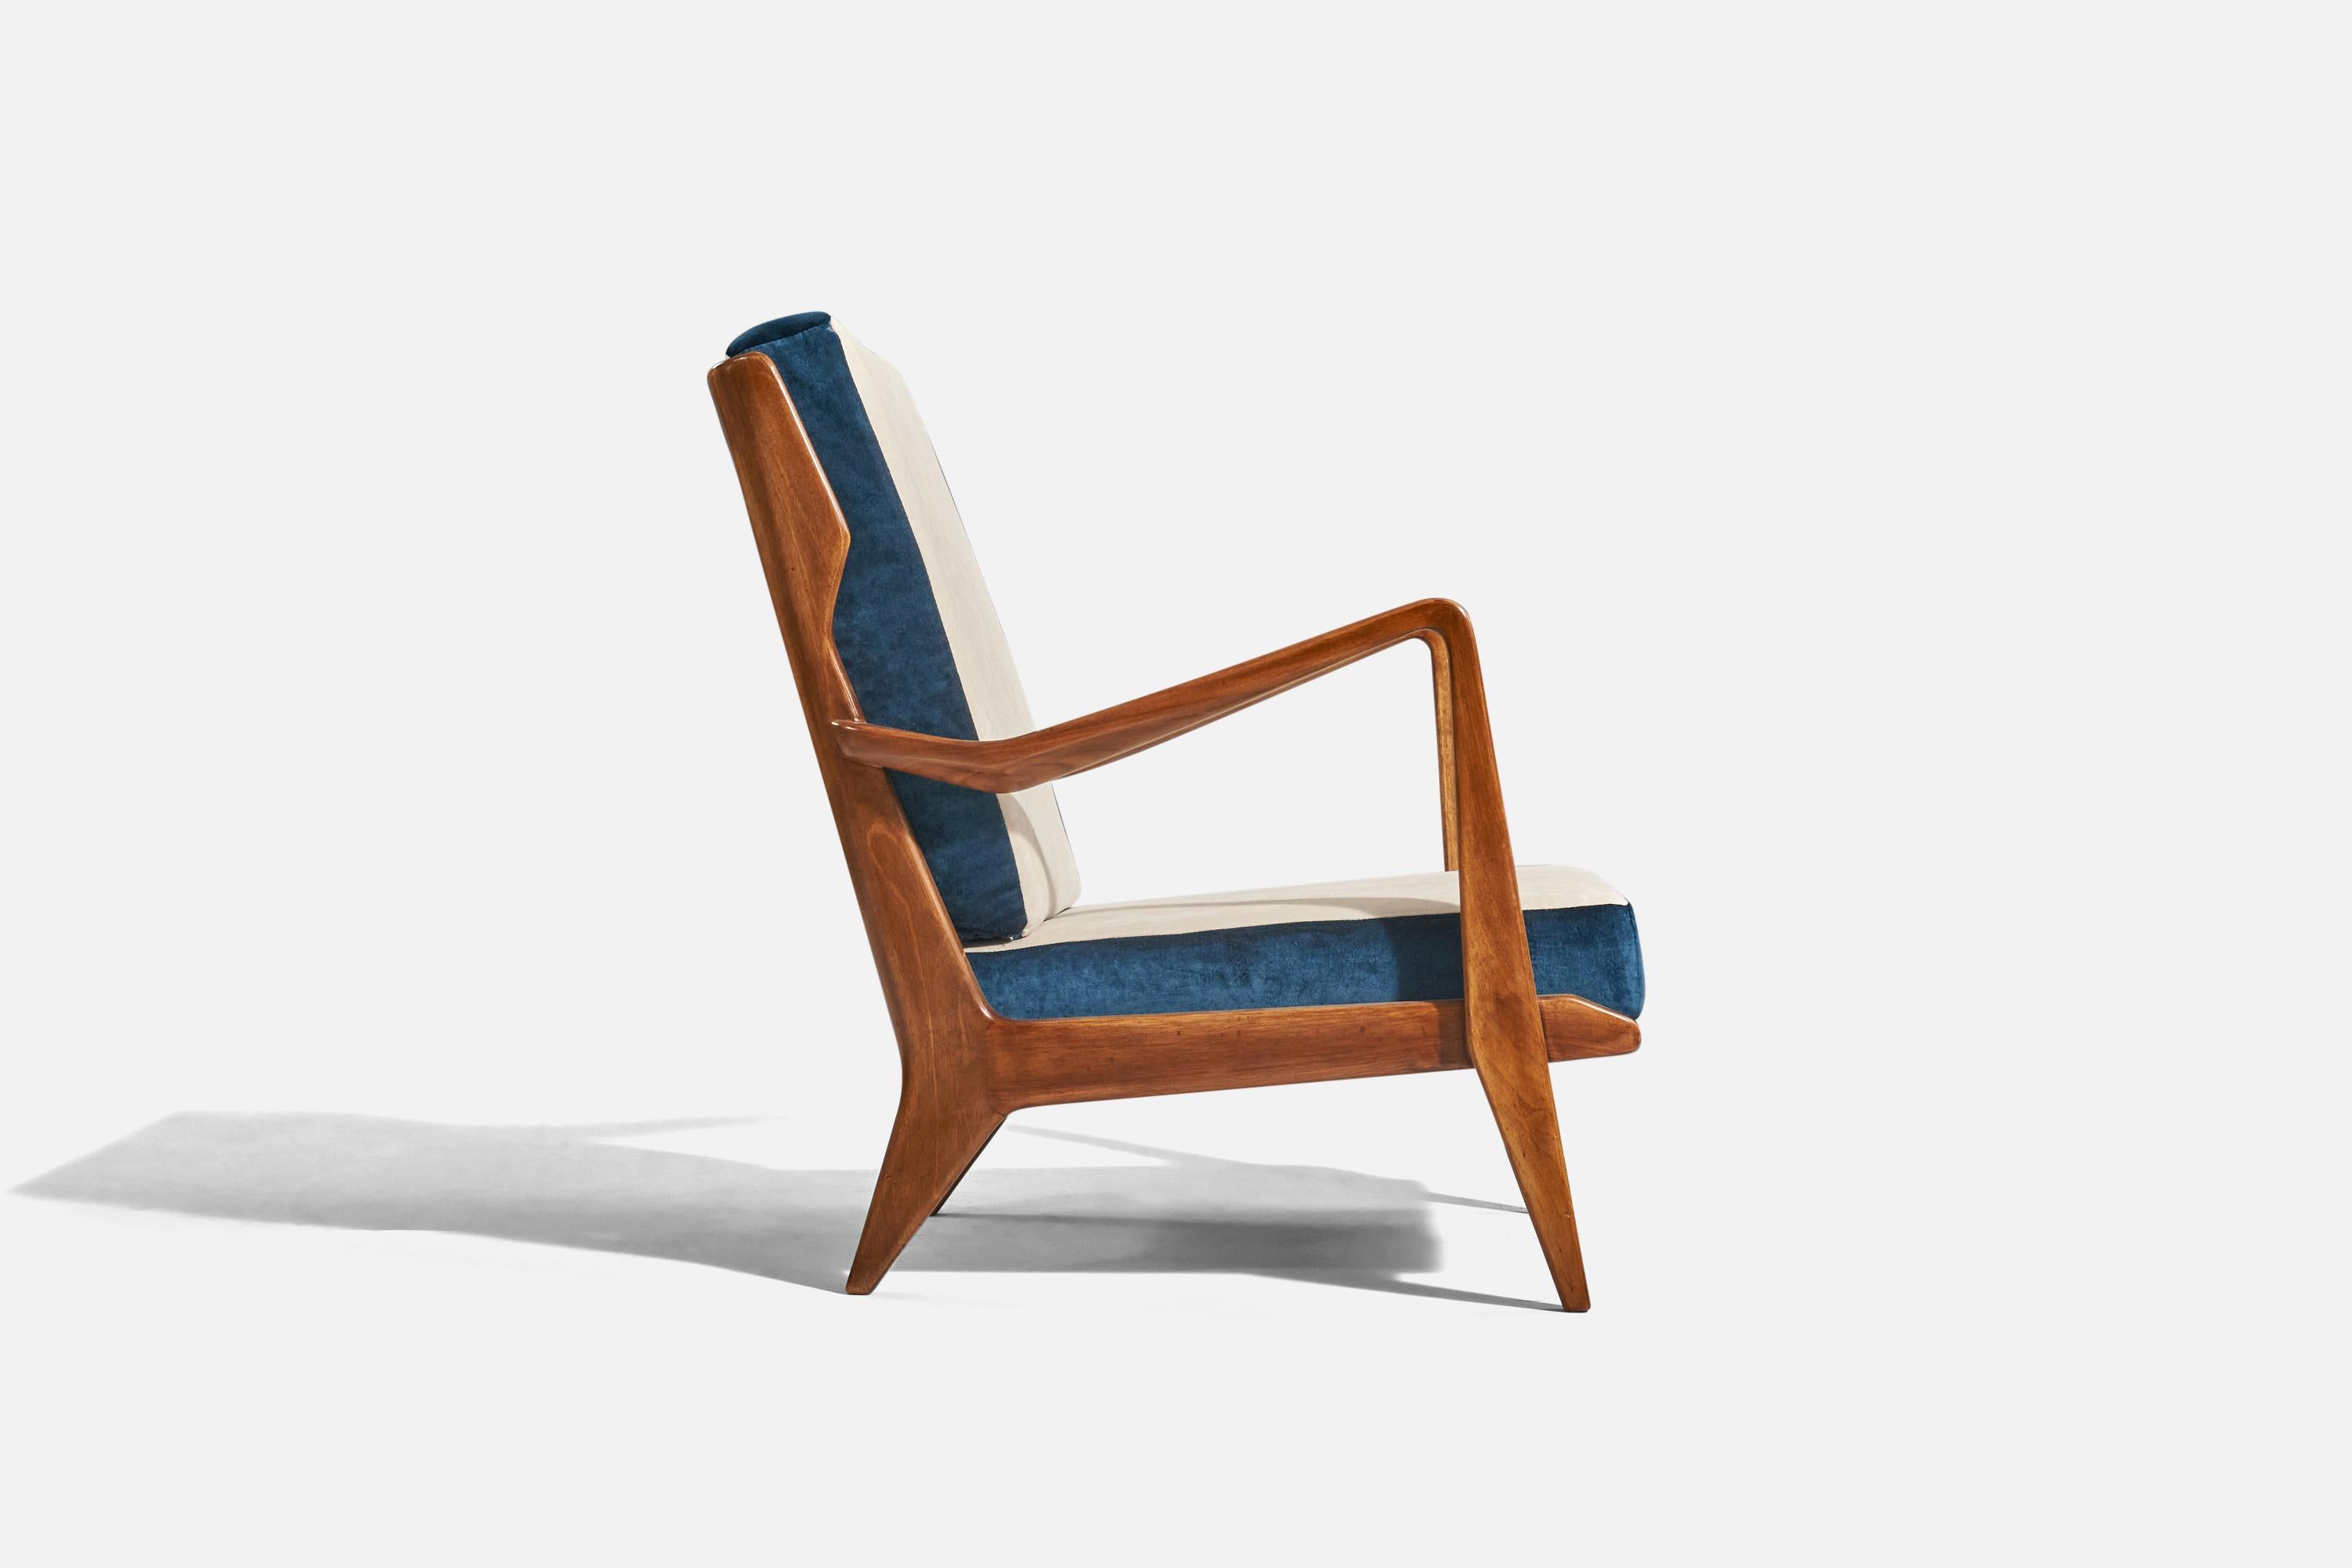 Mid-20th Century Gio Ponti, Lounge Chairs, Walnut, Blue And White Velvet, Cassina, Italy, 1950s For Sale